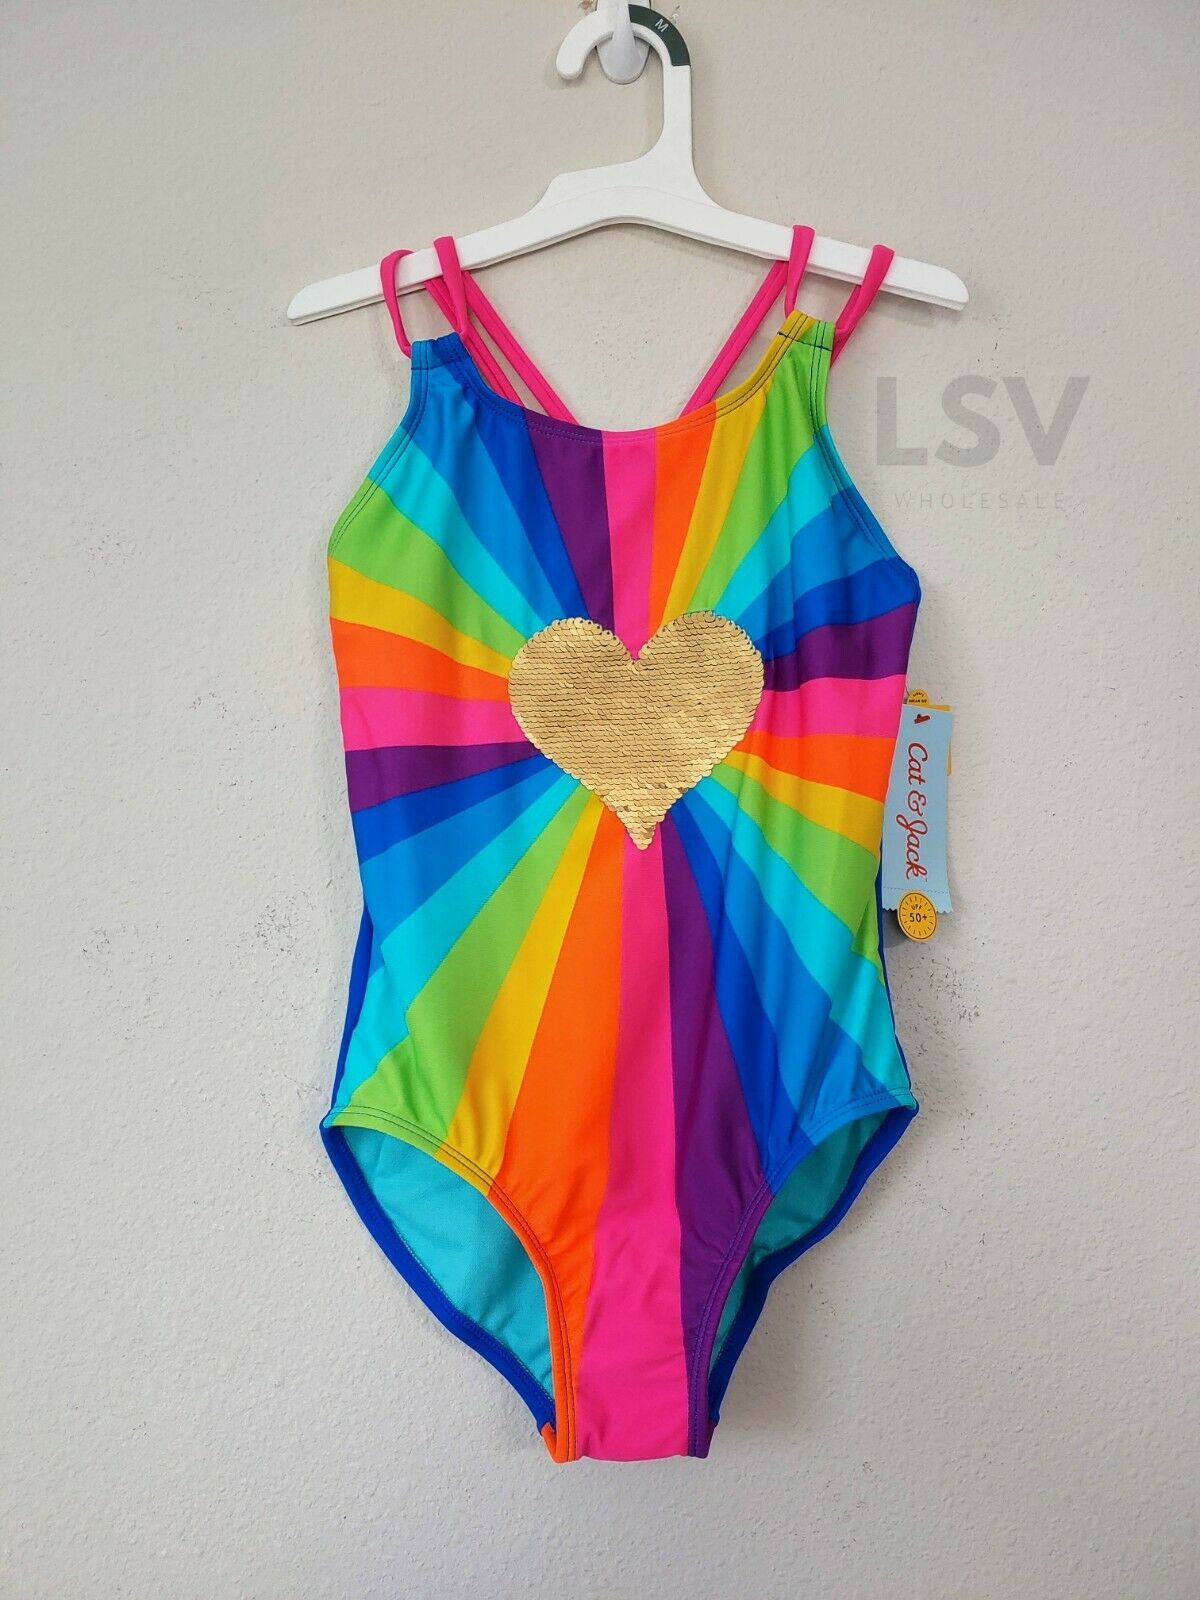 Cat & Jack Girls Heart Sequined One-piece Swimsuit Size M (7/8)